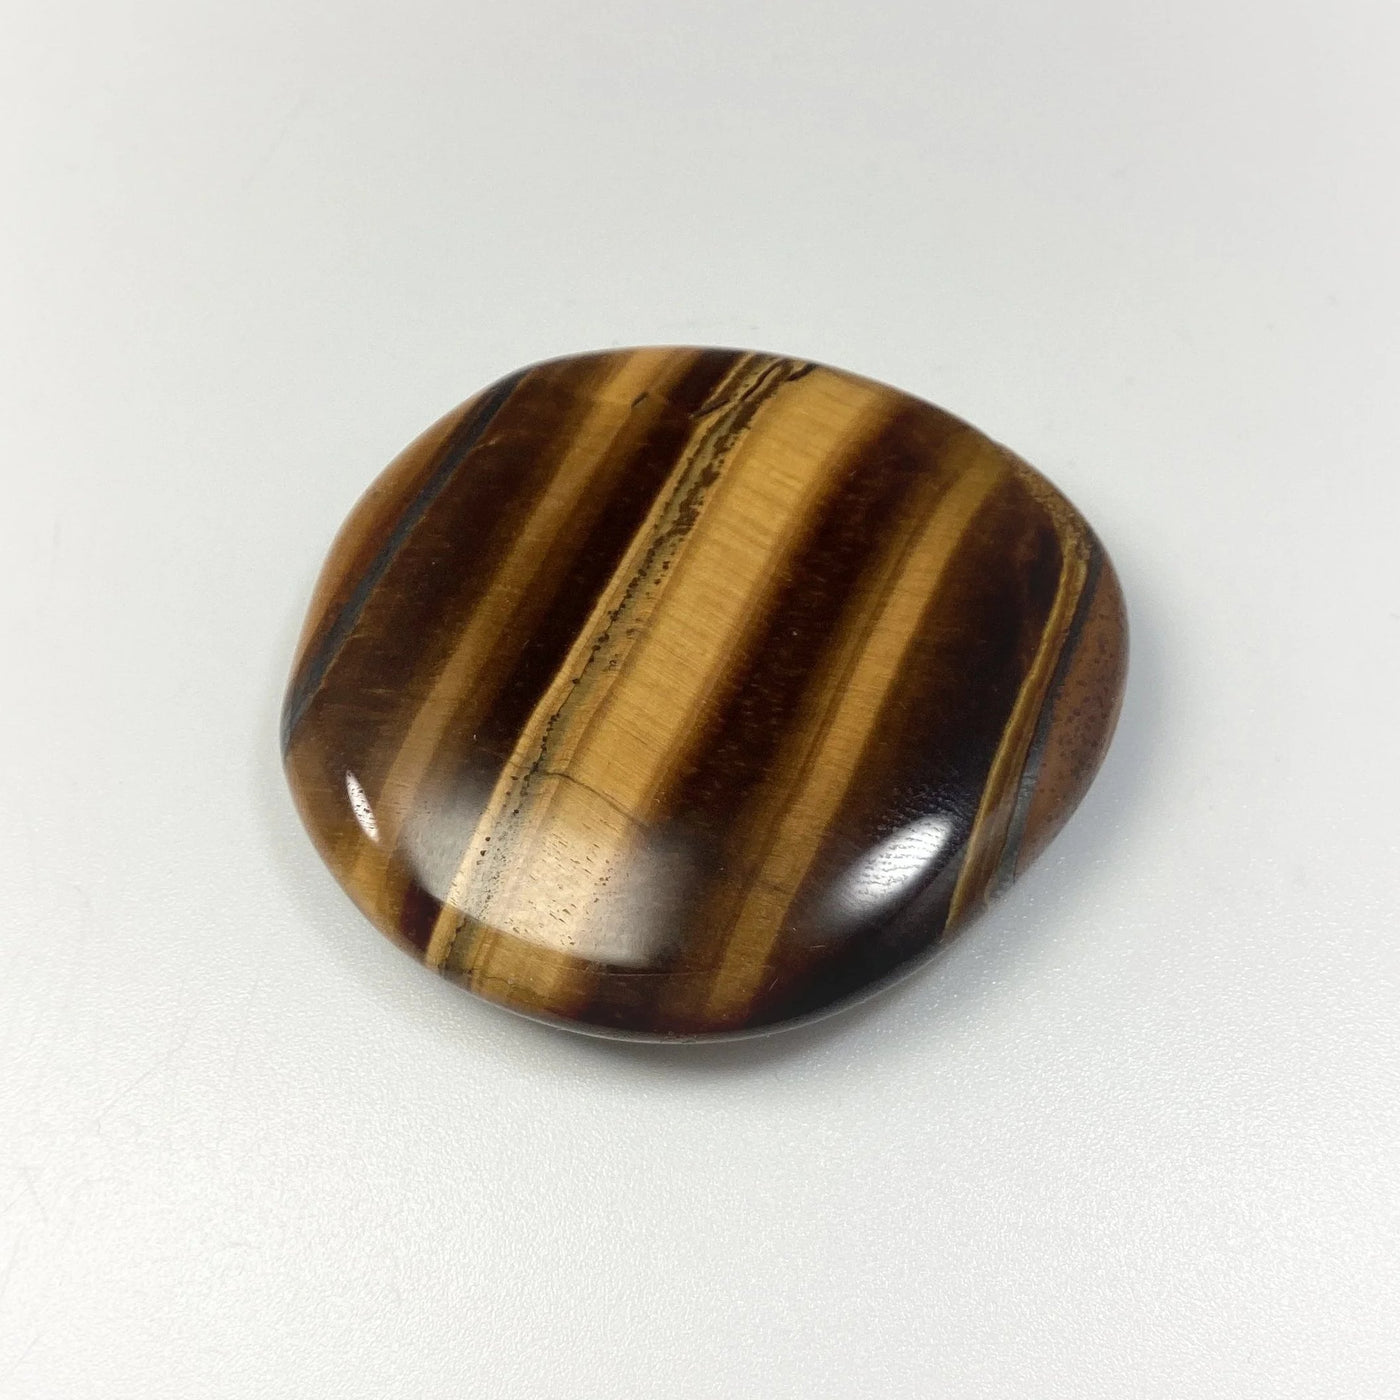 Tiger Eye Touch Stone at $35 Each